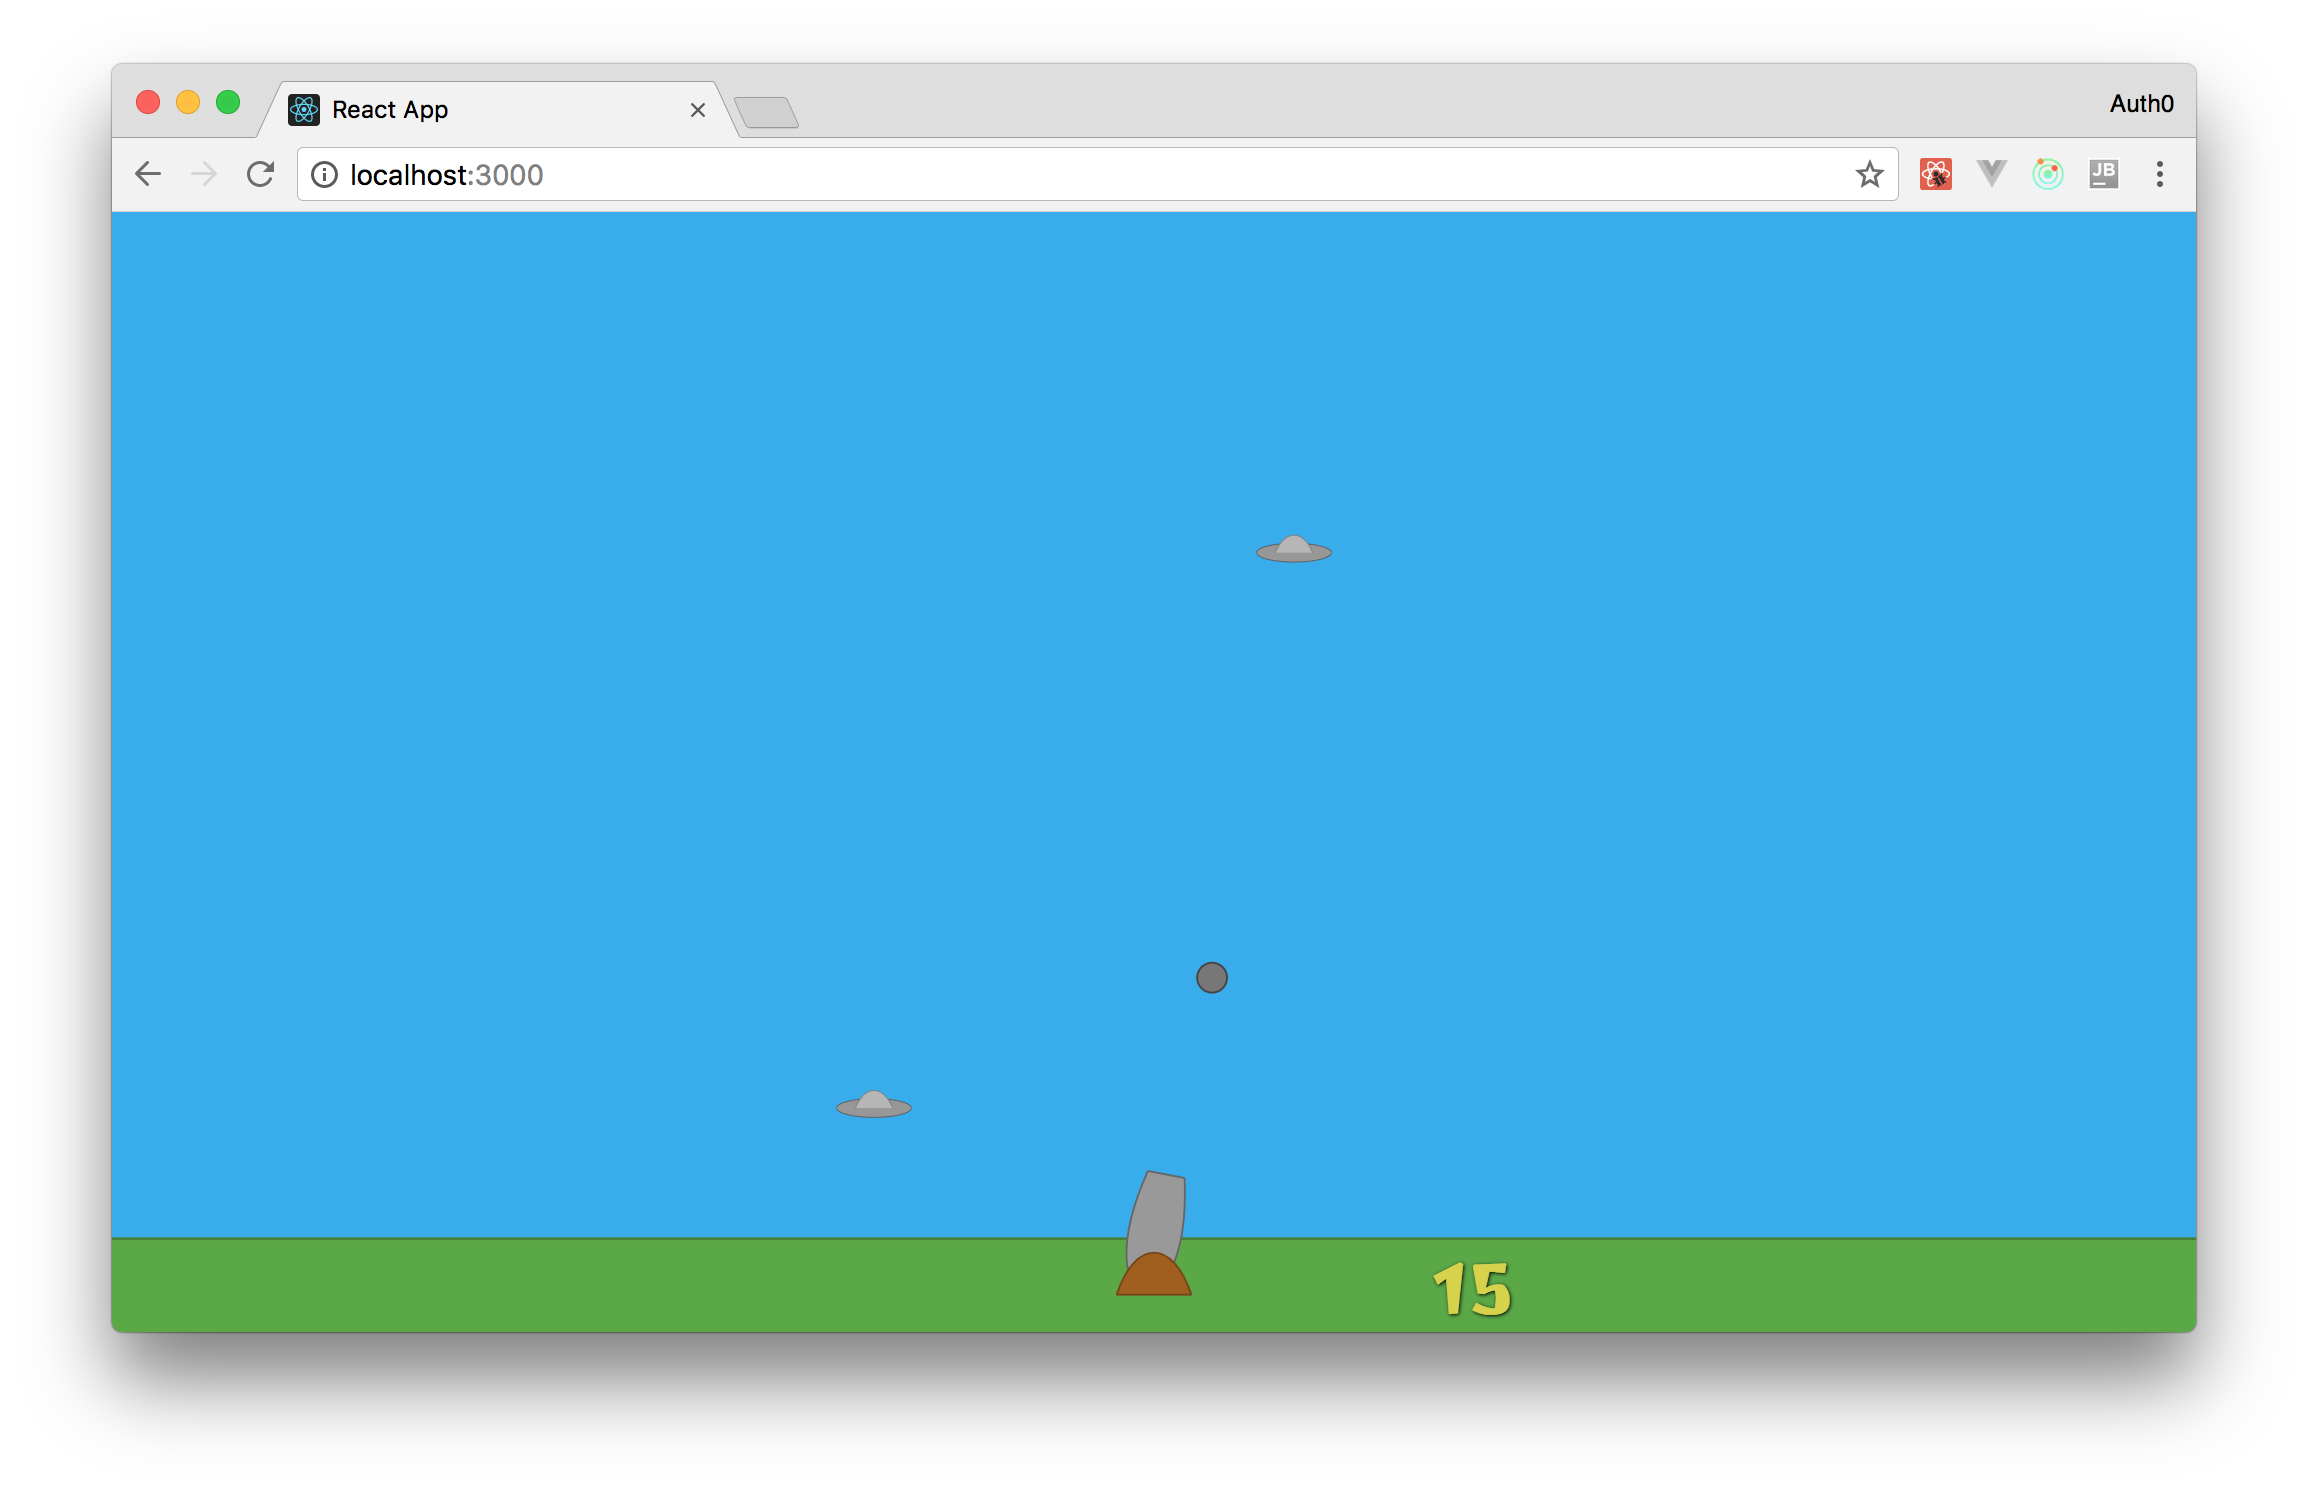 Enabling players to shoot cannon balls in a game created with React, Redux, and SVGs.